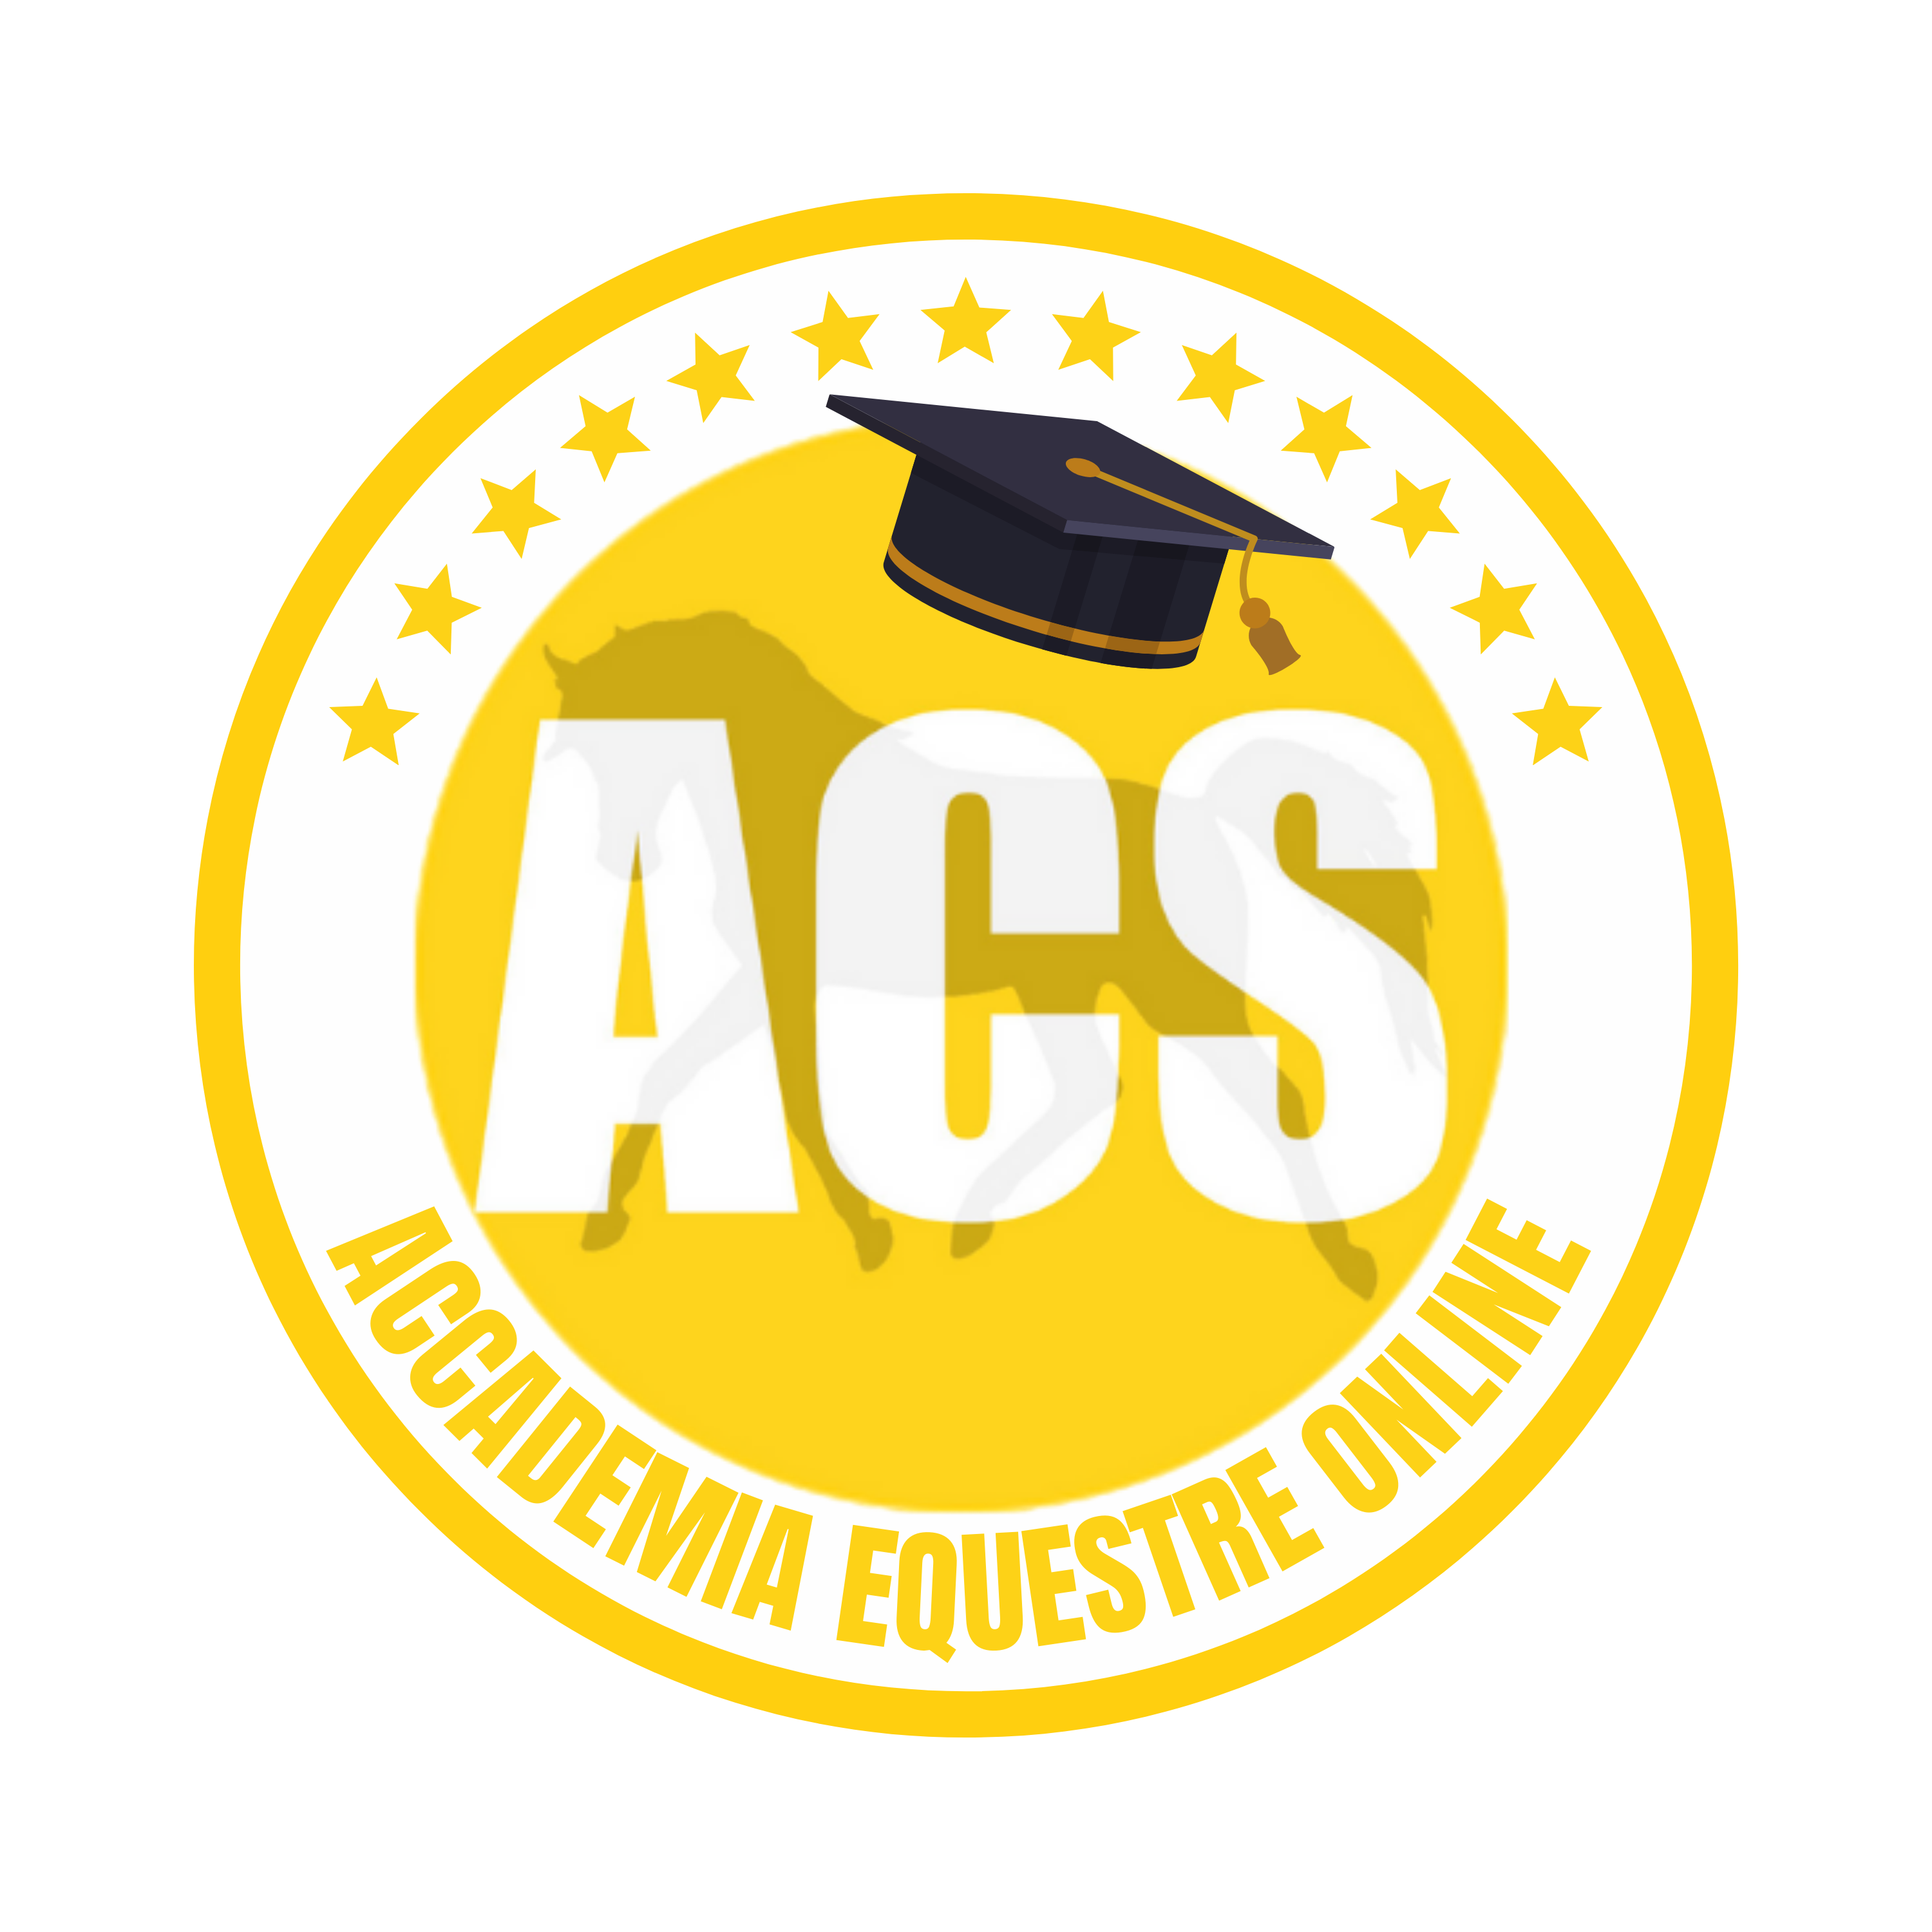 Accademia Equestre Online